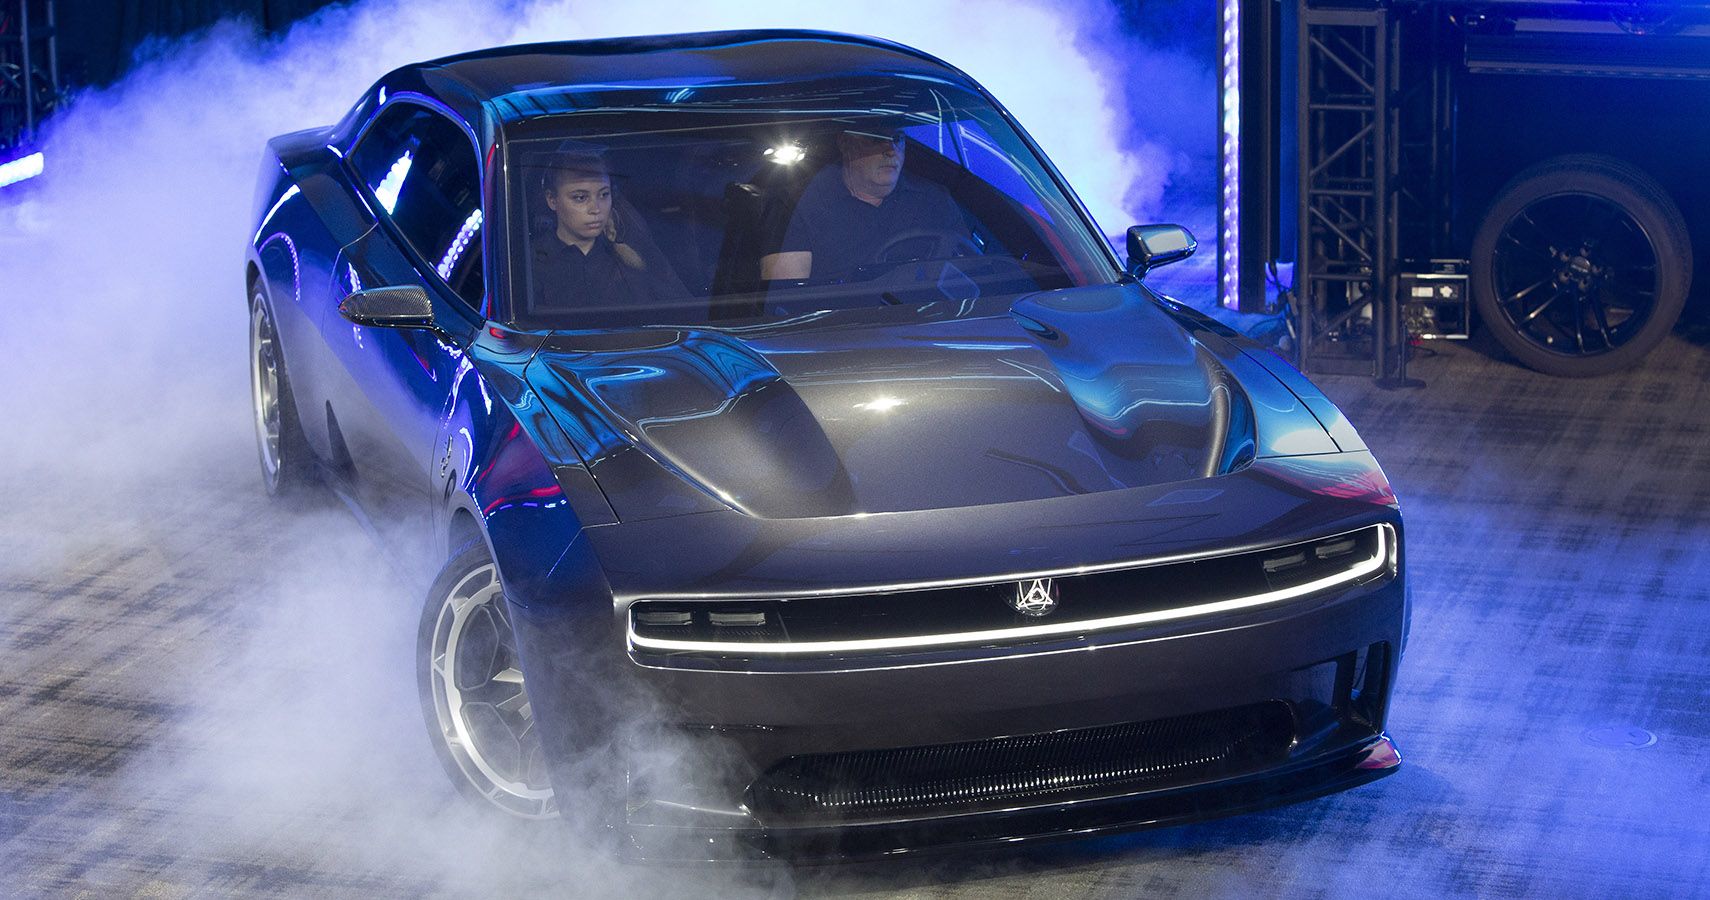 The Next-Gen Dodge Charger